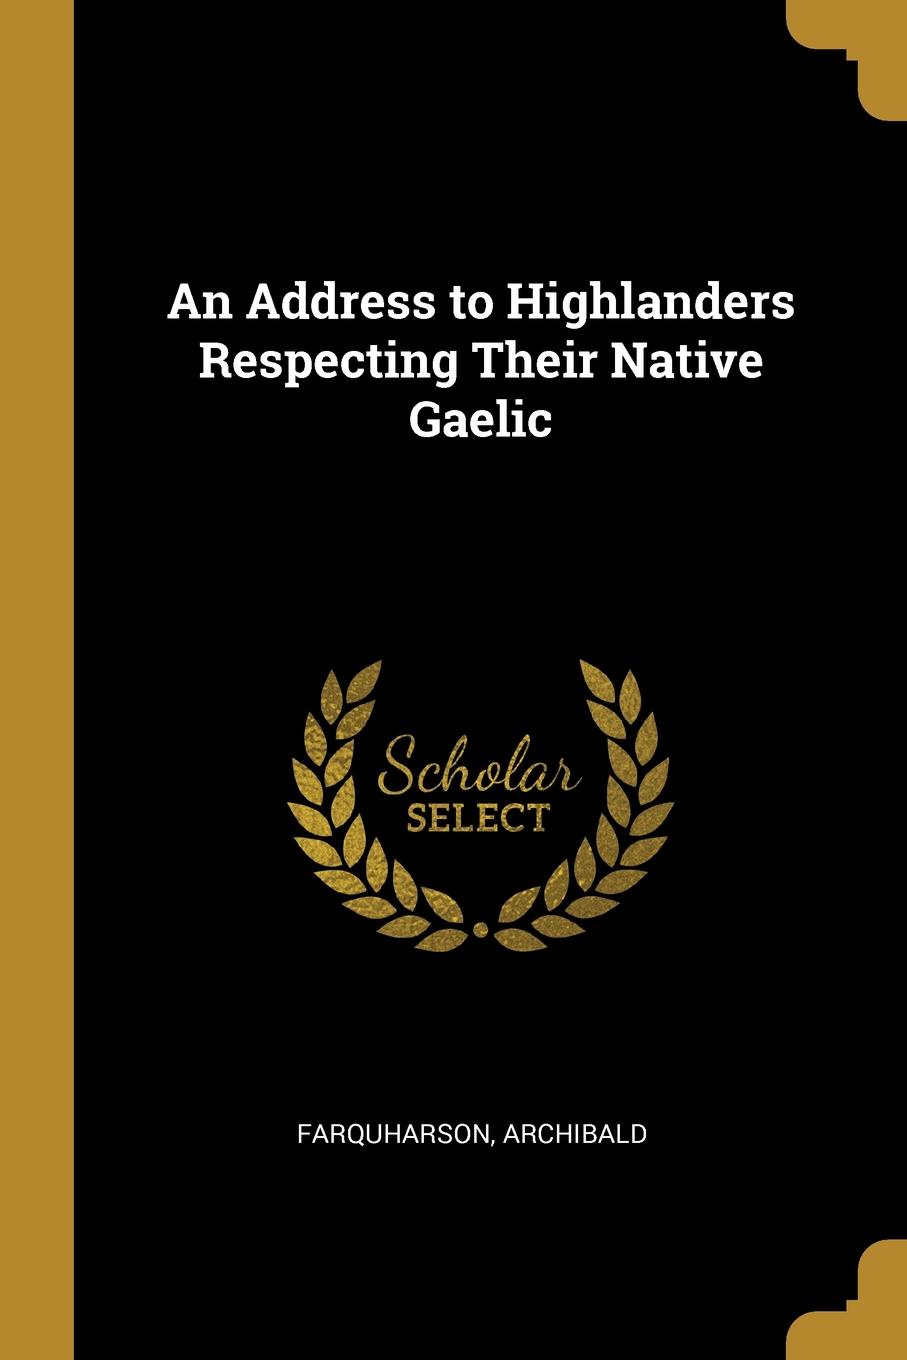 An Address to Highlanders Respecting Their Native Gaelic